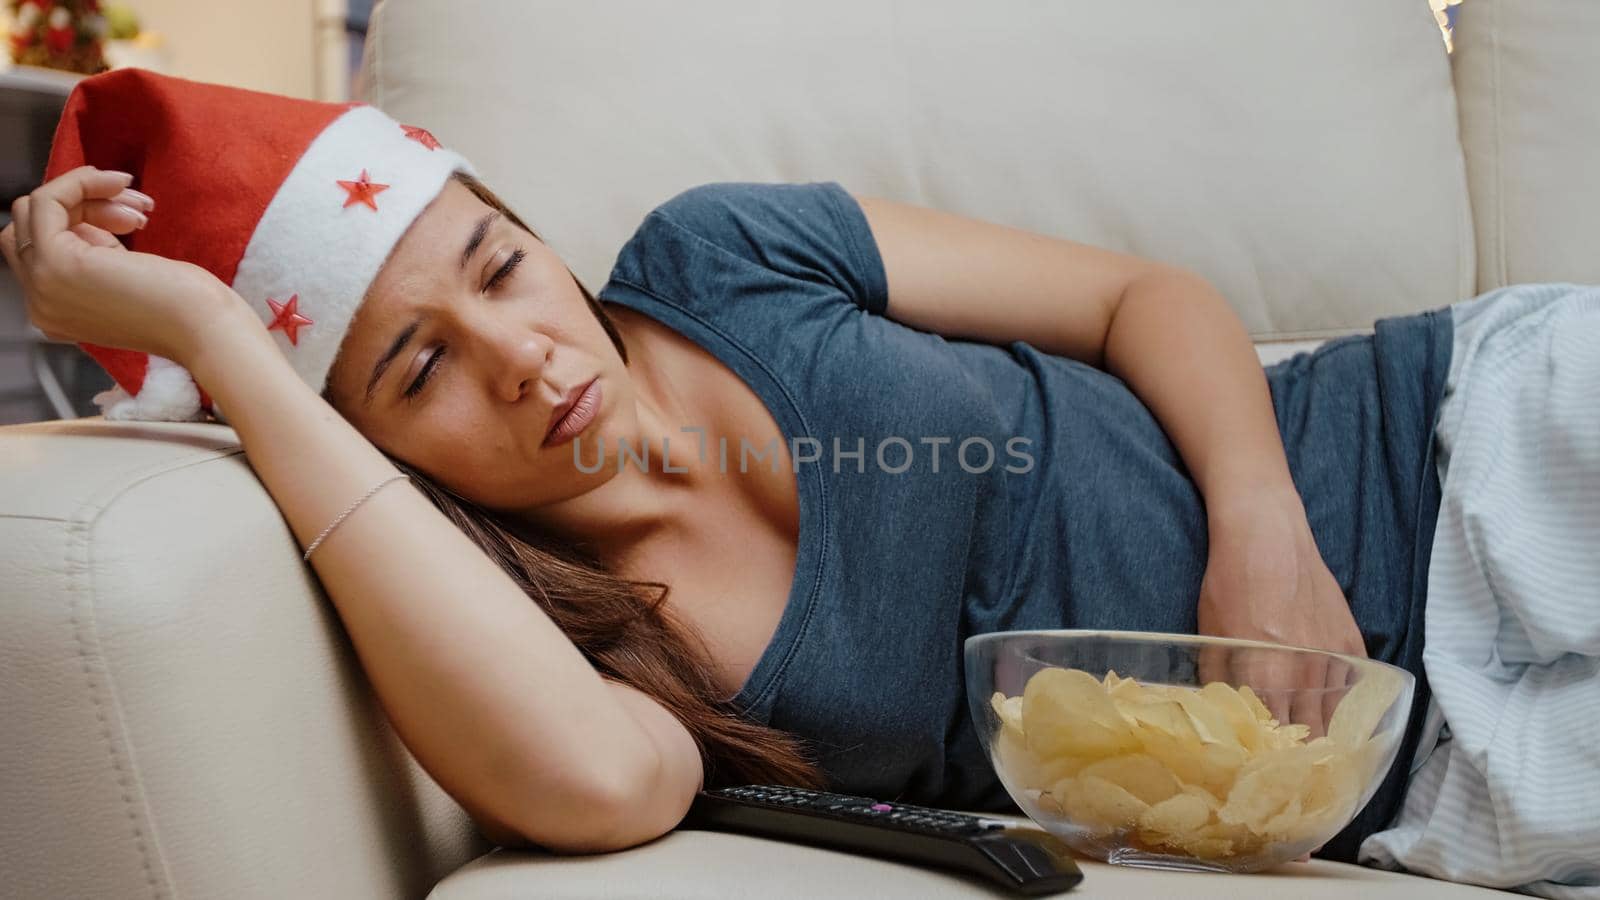 Sleepy person wearing santa hat and sitting at TV with chips by DCStudio